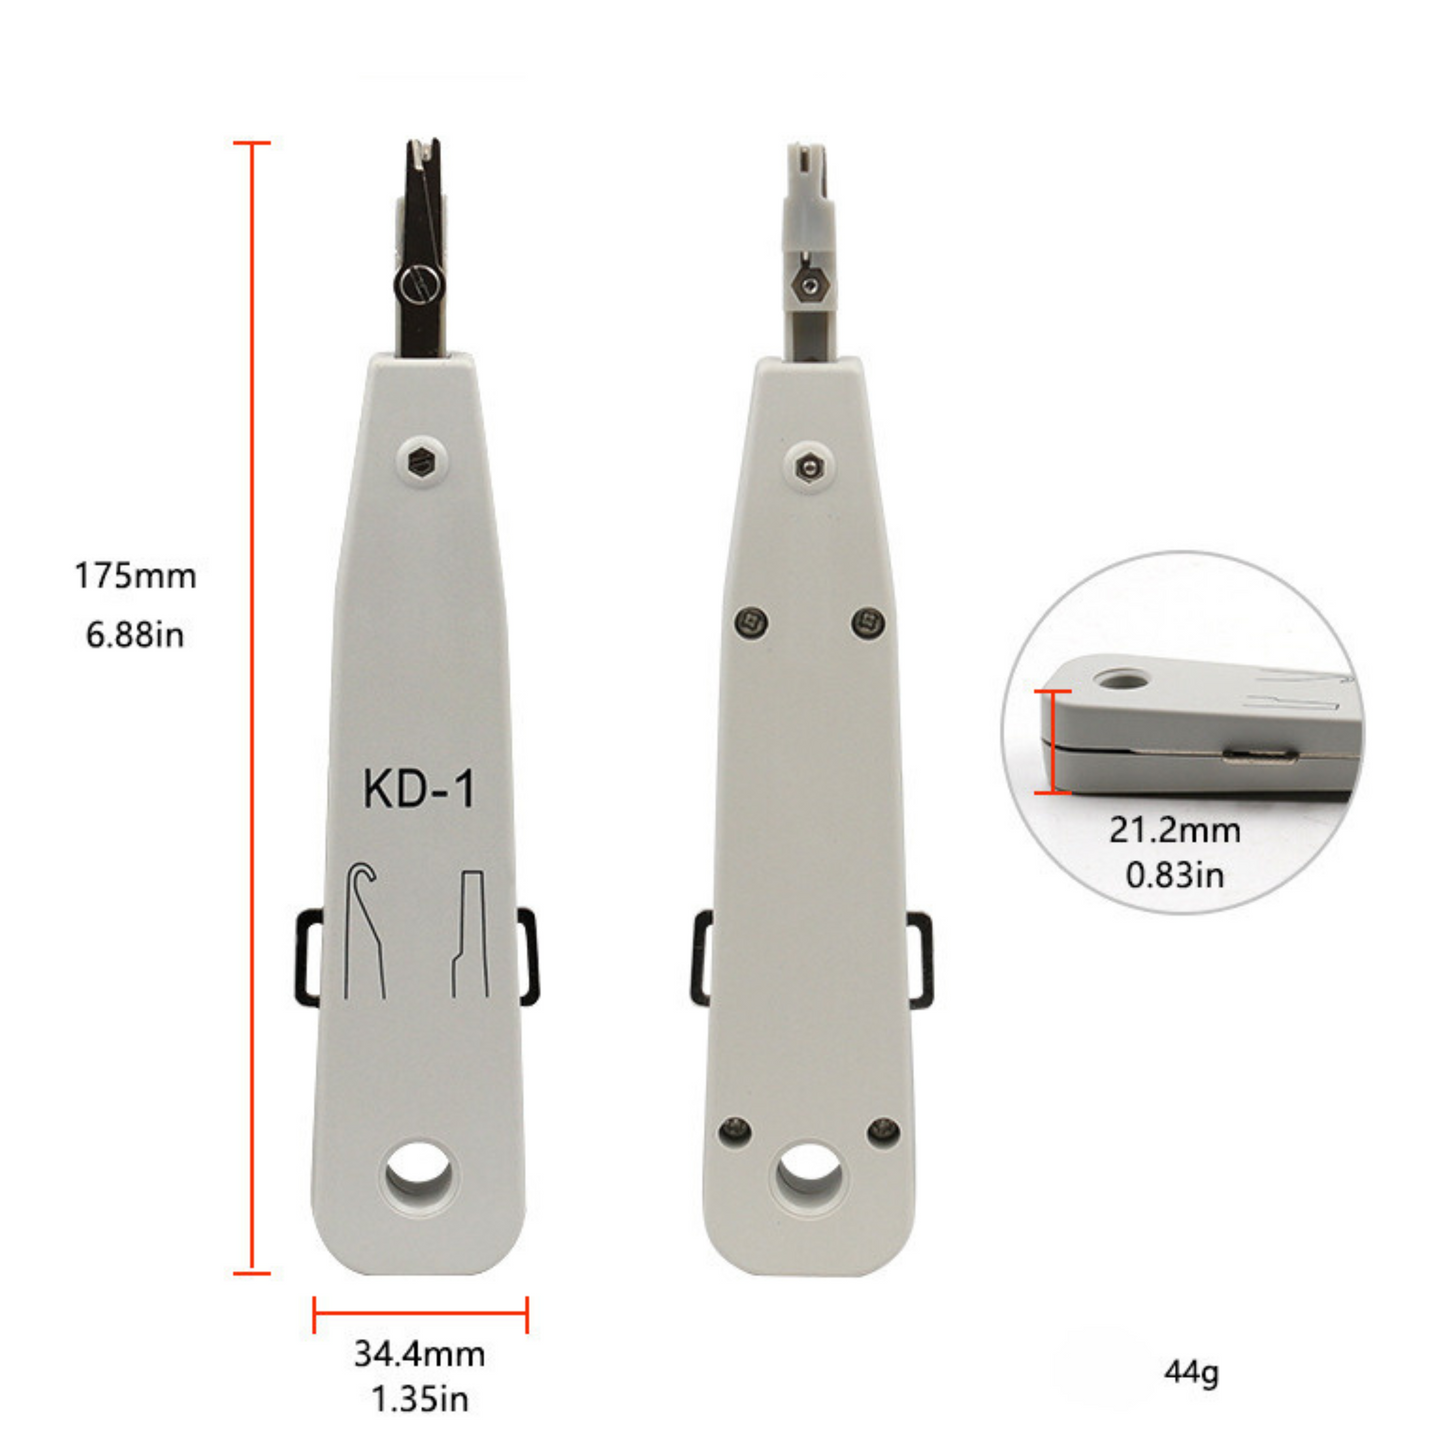 Inbrackets Krone Tool and Stripper: Professional Ethernet Punchdown Tool with Wire Stripper Combo for RJ45, Cat5/Cat6/Ca7, and Telephone Cable